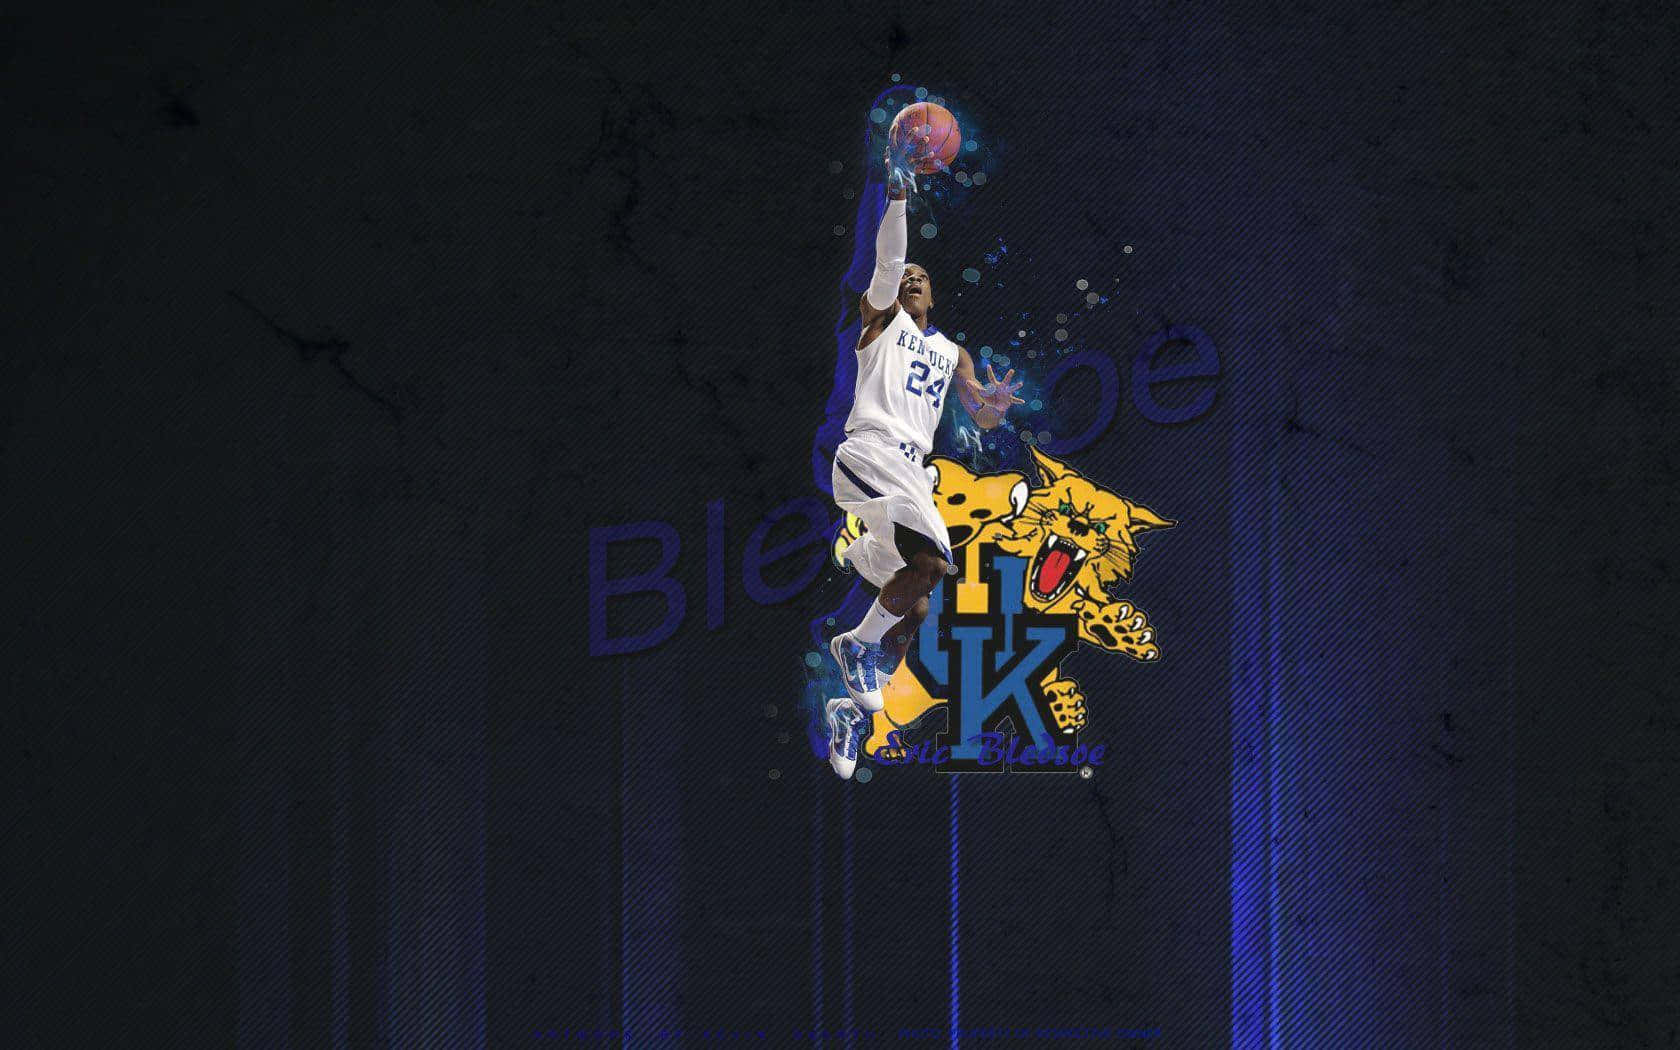 Stand and Cheer for Kentucky Basketball! Wallpaper